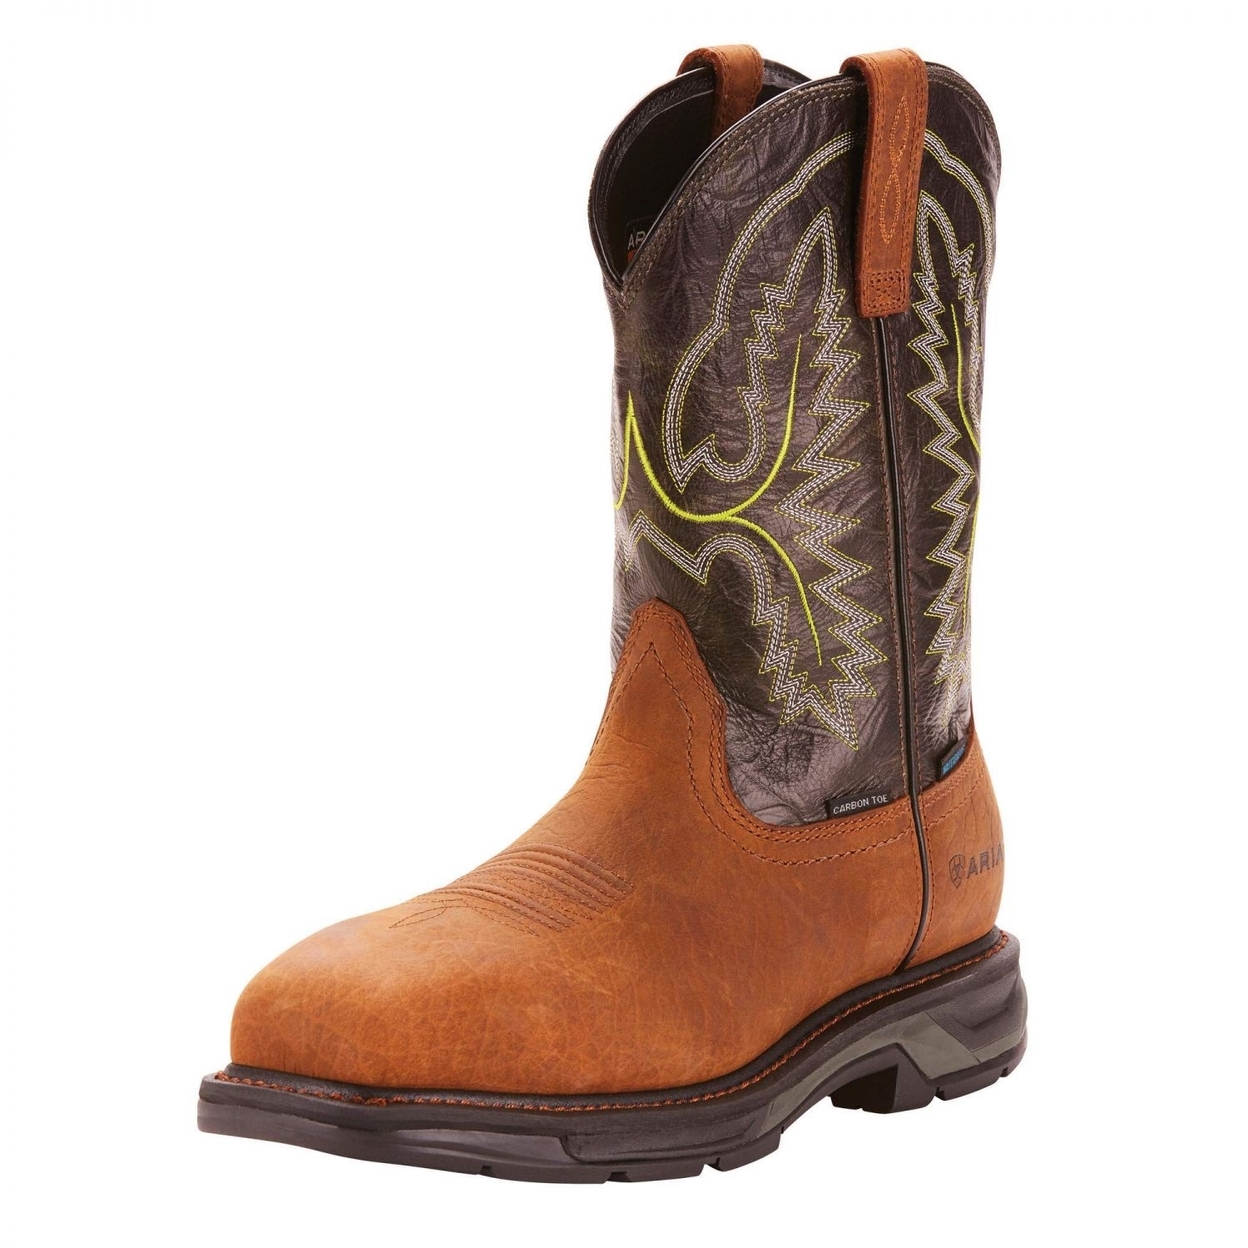 Ariat Work Men's Workhog XT H2O Carbon Toe Western Boot ONE SIZE BRK/ FOREST - BRK/ FOREST, 9-D